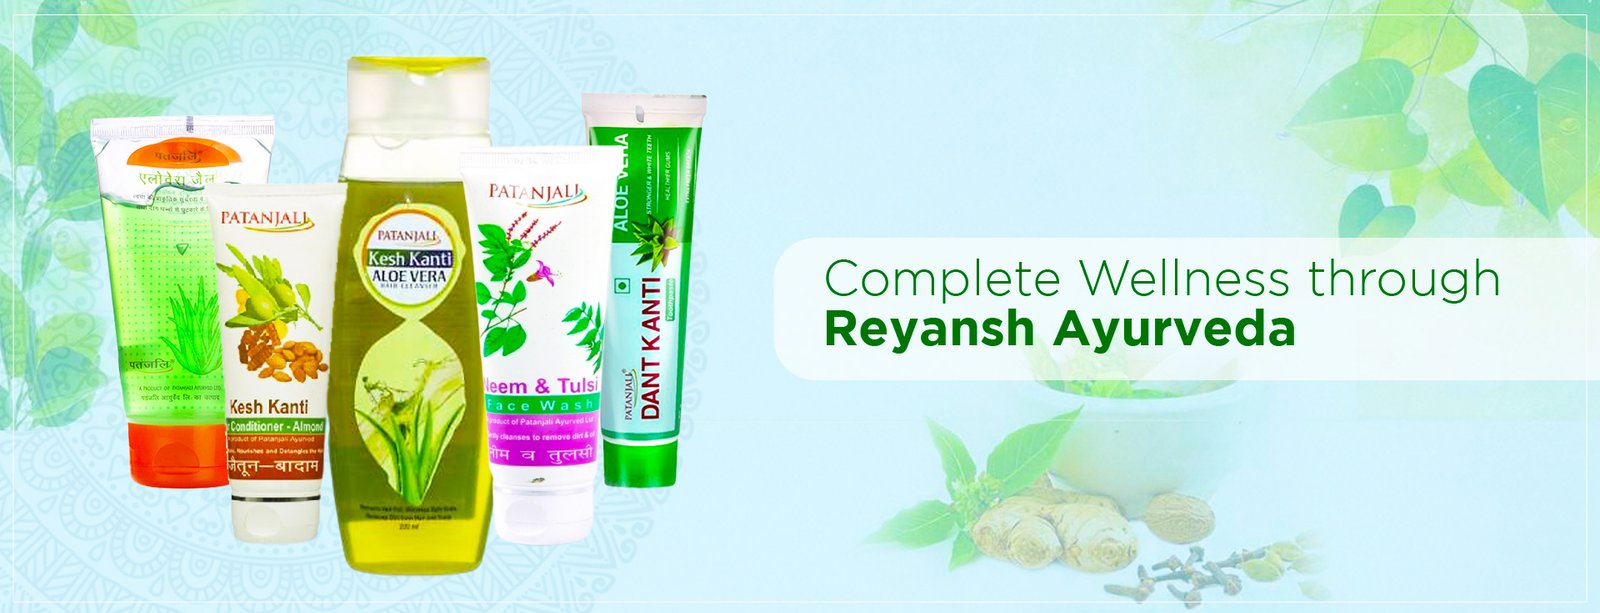 Ayurvedaproducts